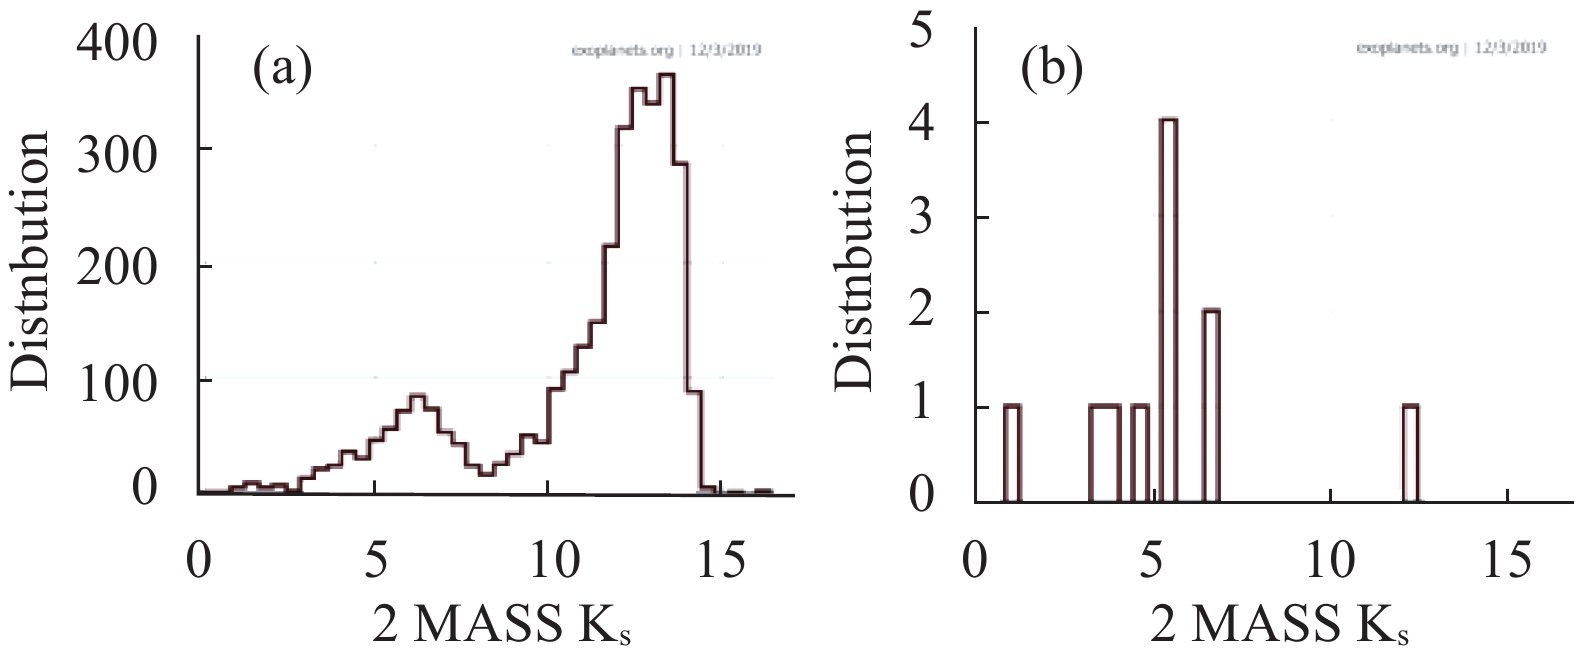 Brightness distribution of the main star of the direct imaging exoplanet system